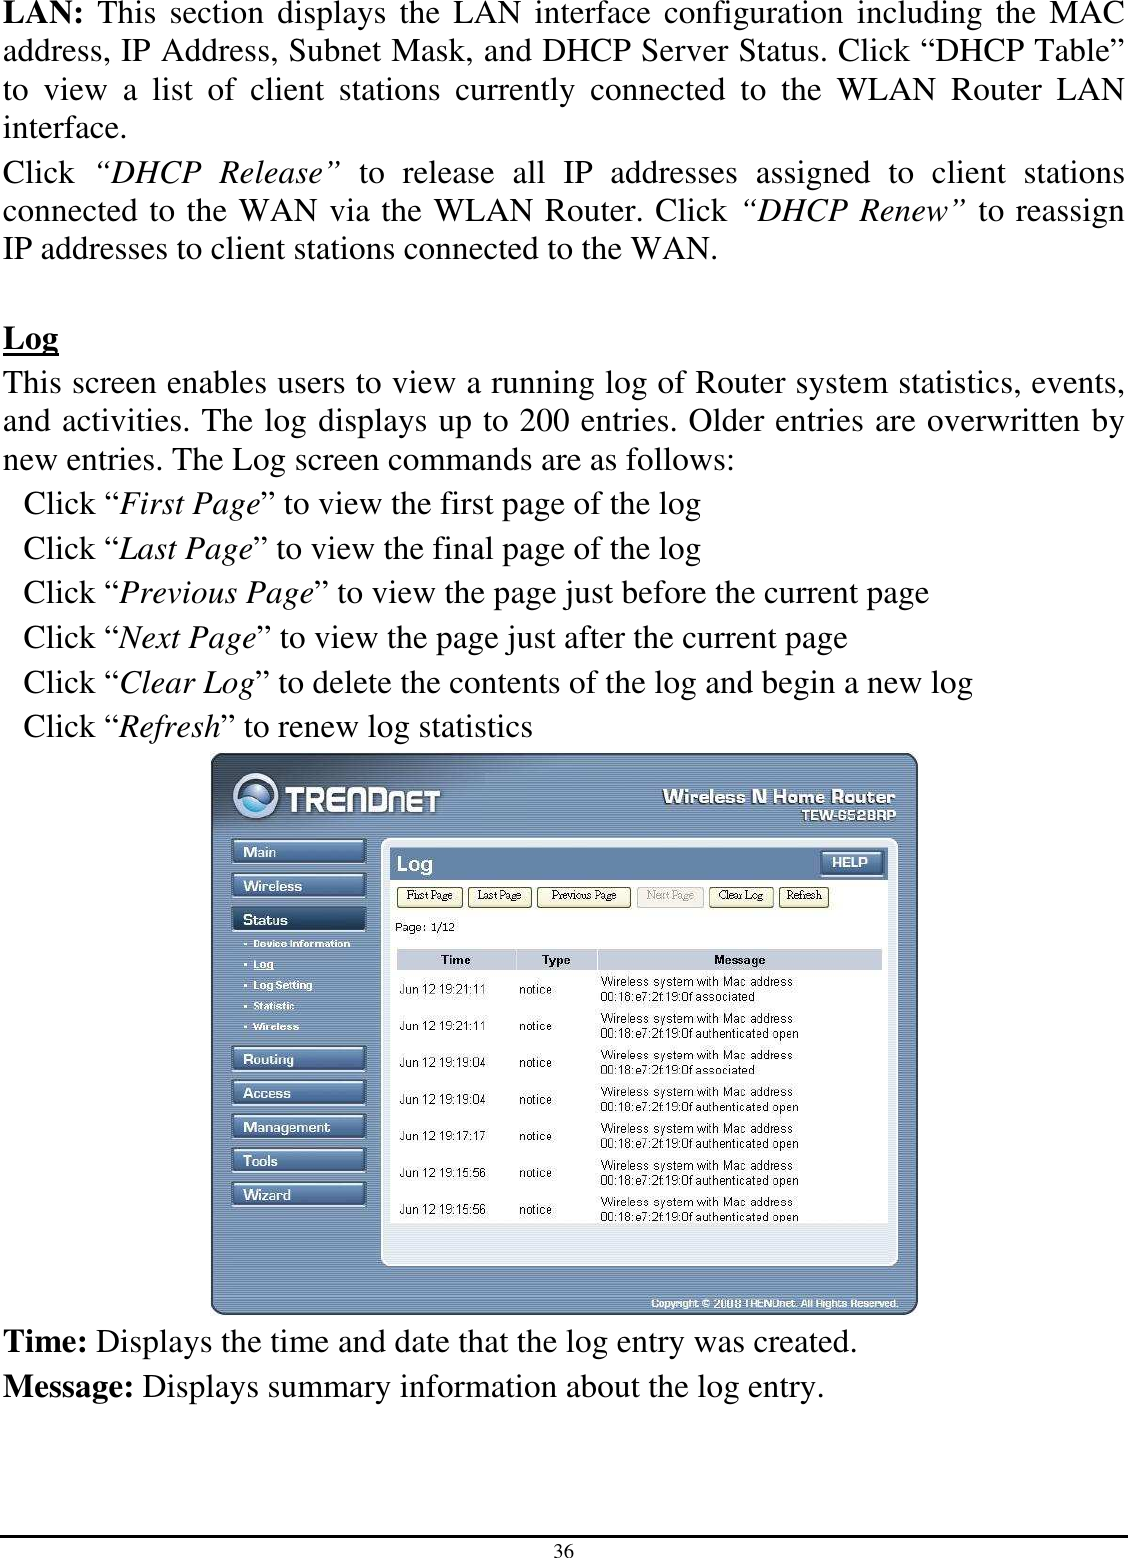 36 LAN: This section displays the  LAN interface  configuration  including the MAC address, IP Address, Subnet Mask, and DHCP Server Status. Click “DHCP Table” to  view  a  list  of  client  stations  currently  connected  to  the  WLAN  Router  LAN interface. Click  “DHCP  Release”  to  release  all  IP  addresses  assigned  to  client  stations connected to the WAN via the WLAN Router. Click “DHCP Renew” to reassign IP addresses to client stations connected to the WAN.  Log This screen enables users to view a running log of Router system statistics, events, and activities. The log displays up to 200 entries. Older entries are overwritten by new entries. The Log screen commands are as follows: Click “First Page” to view the first page of the log Click “Last Page” to view the final page of the log Click “Previous Page” to view the page just before the current page Click “Next Page” to view the page just after the current page Click “Clear Log” to delete the contents of the log and begin a new log Click “Refresh” to renew log statistics    Time: Displays the time and date that the log entry was created. Message: Displays summary information about the log entry. 